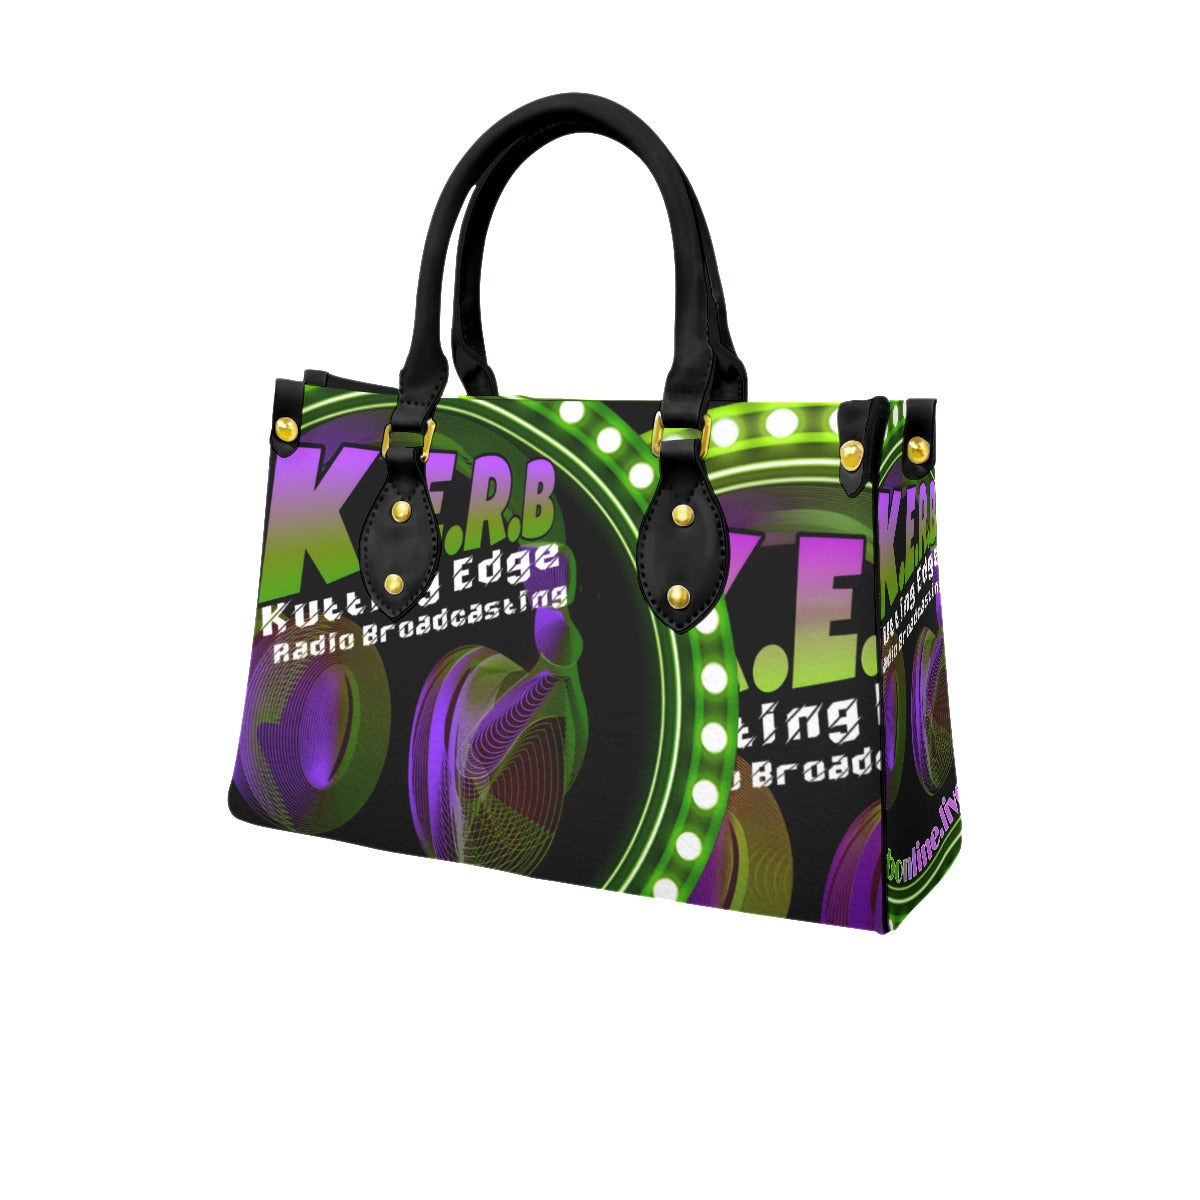 KERB Purple and Lime Logo Purse with Black Handle